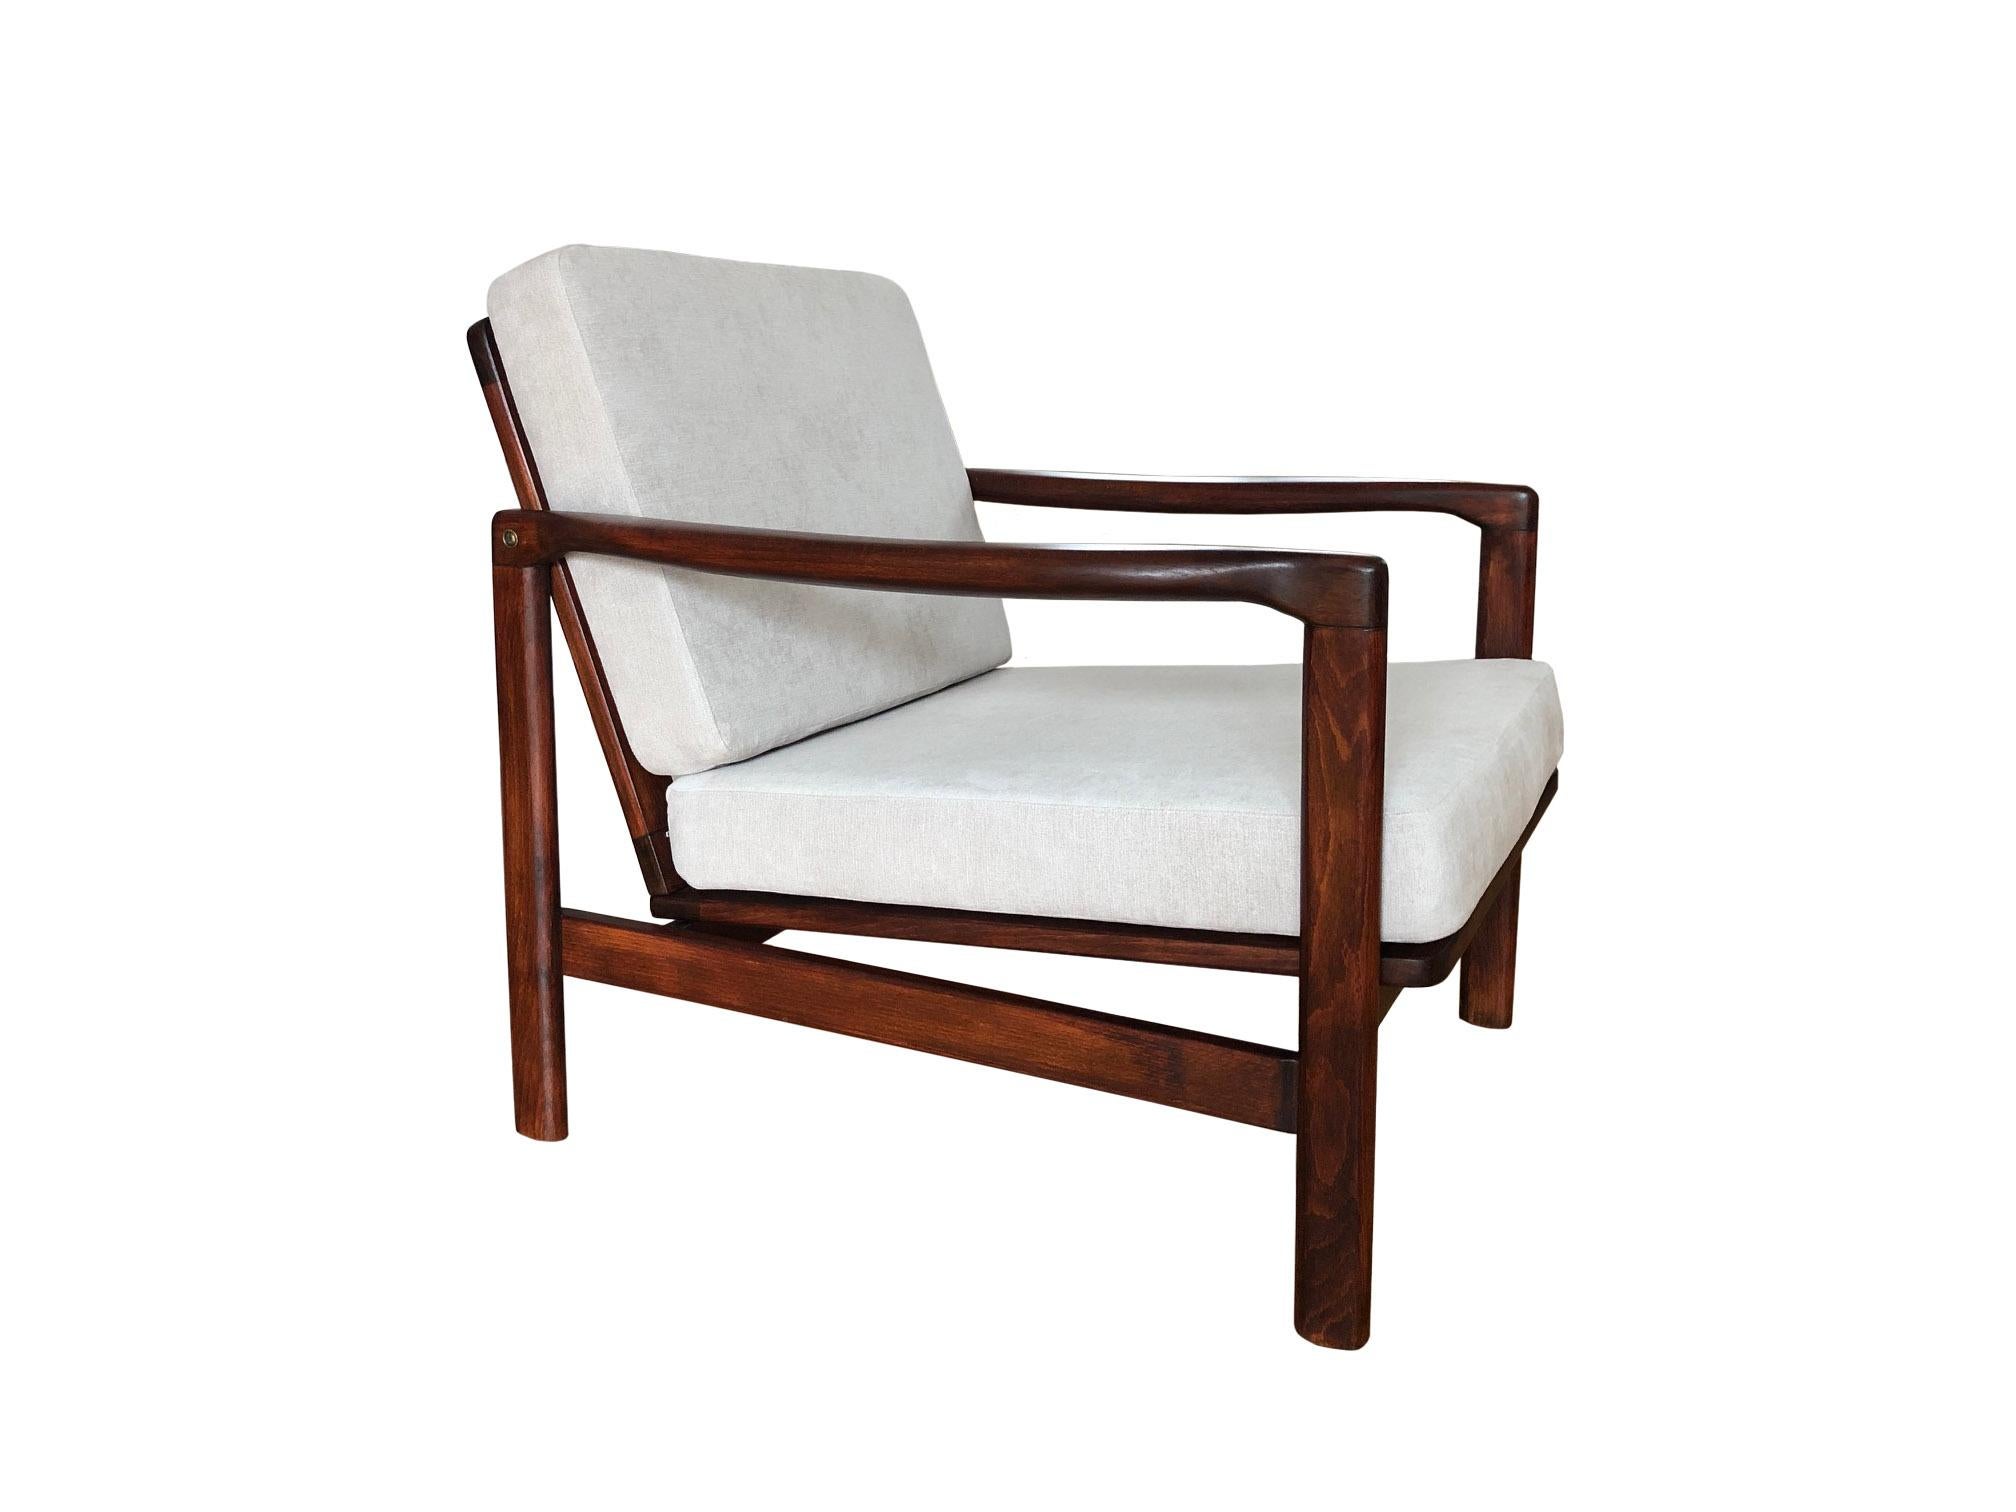 The lounge chair model B-7752, designed by Zenon Baczyk, has been manufactured by Swarzedzkie Fabryki Mebli in Poland in the 1960s. 

The structure is made of beech wood in a warm walnut color, finished with a semi matte varnish. The upholstery is